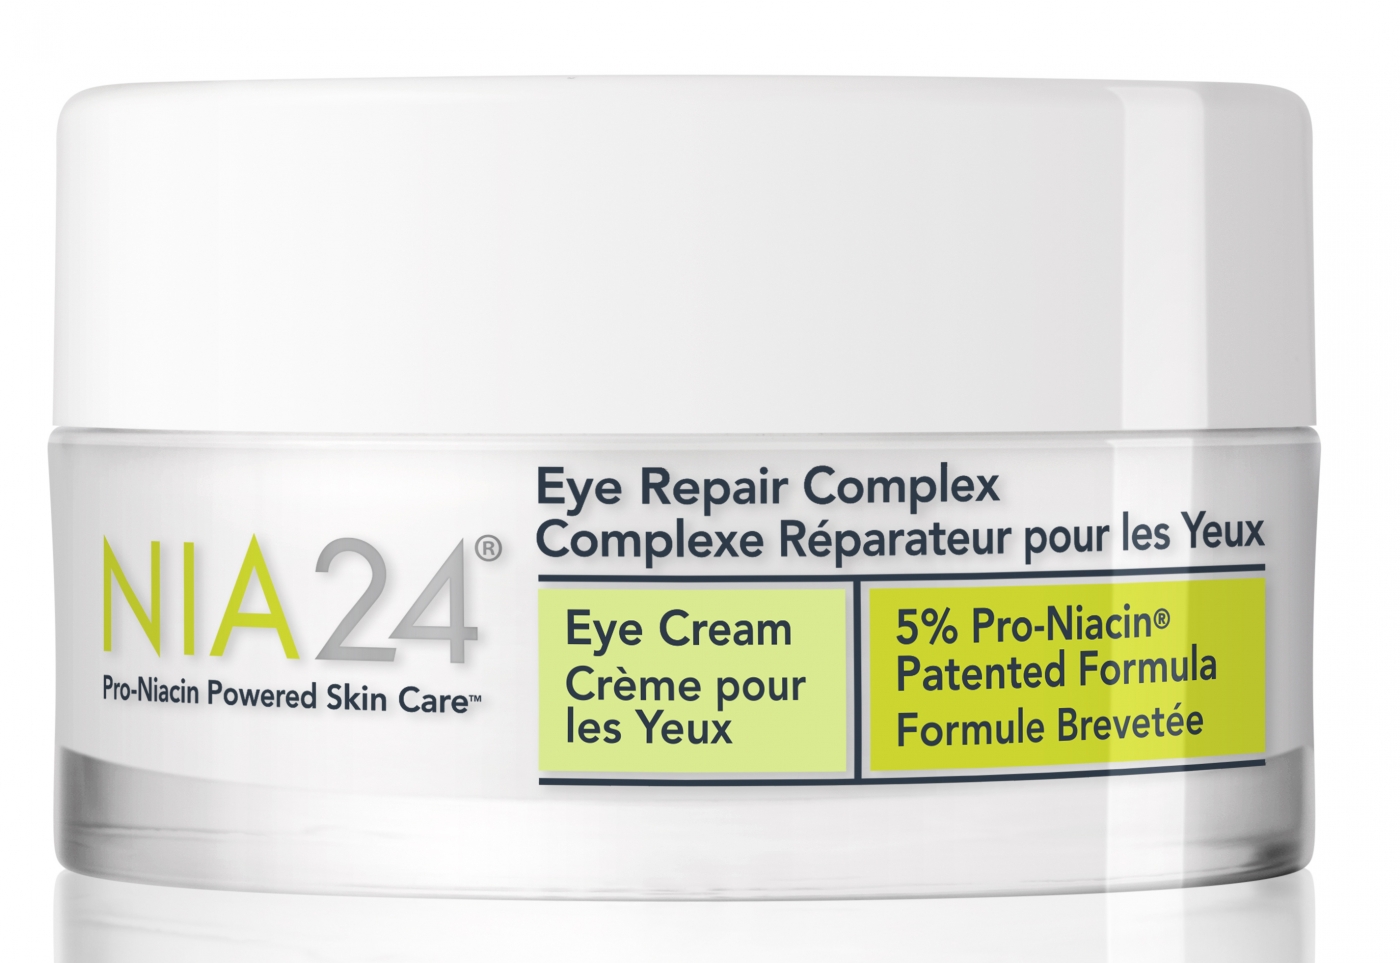 NIA24 Updates Roster of Products